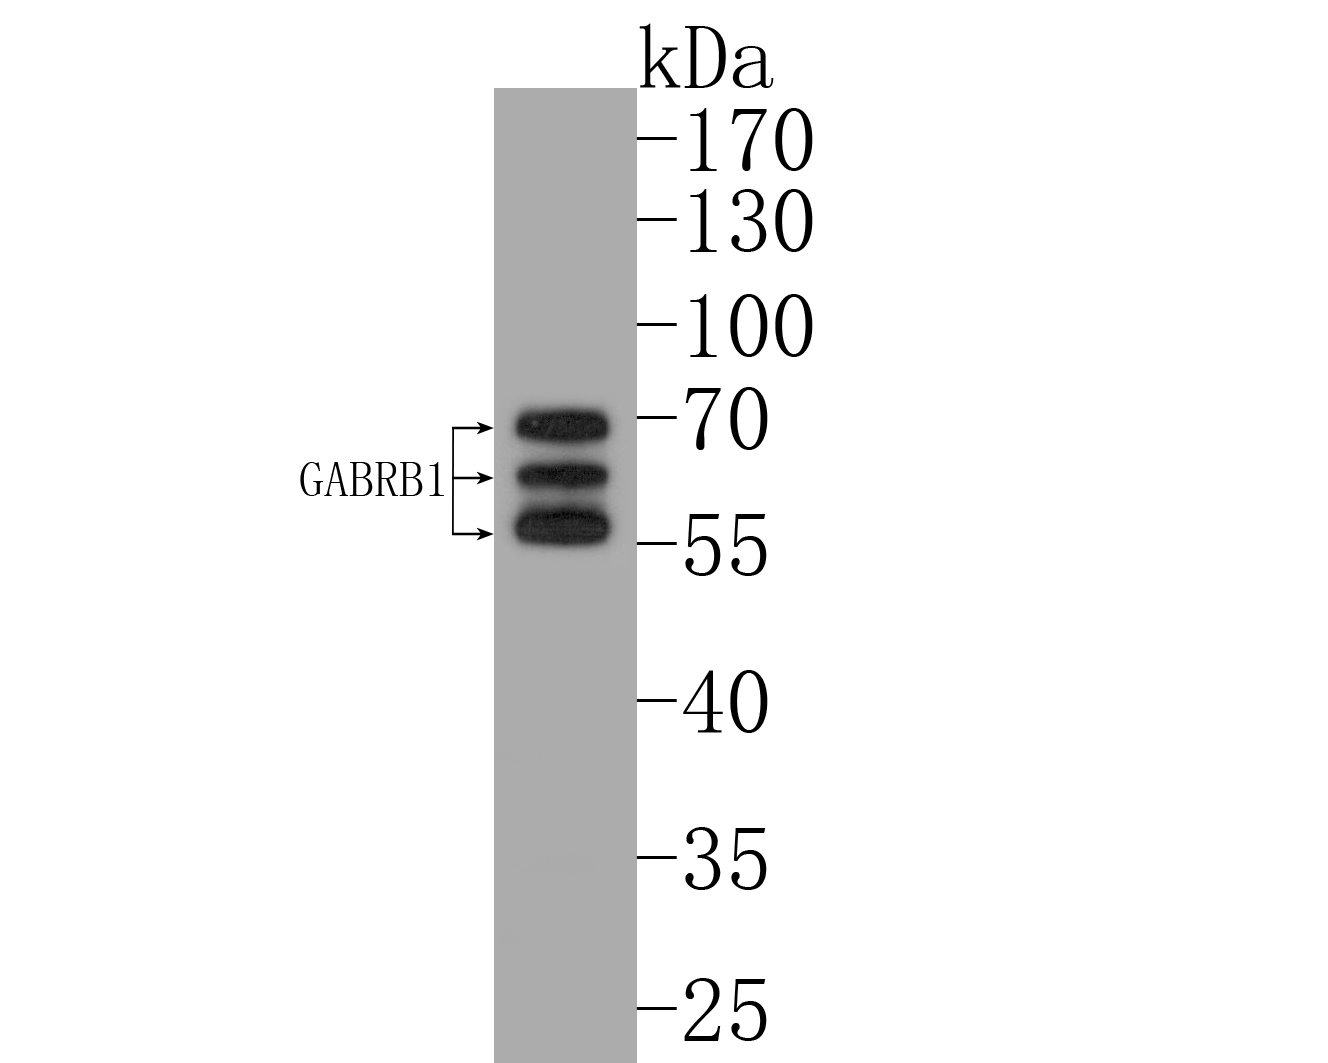 Western blot analysis of GABRB1 on rat brain tissue lysates. Proteins were transferred to a PVDF membrane and blocked with 5% BSA in PBS for 1 hour at room temperature. The primary antibody (ER1901-66, 1/500) was used in 5% BSA at room temperature for 2 hours. Goat Anti-Rabbit IgG - HRP Secondary Antibody (HA1001) at 1:5,000 dilution was used for 1 hour at room temperature.